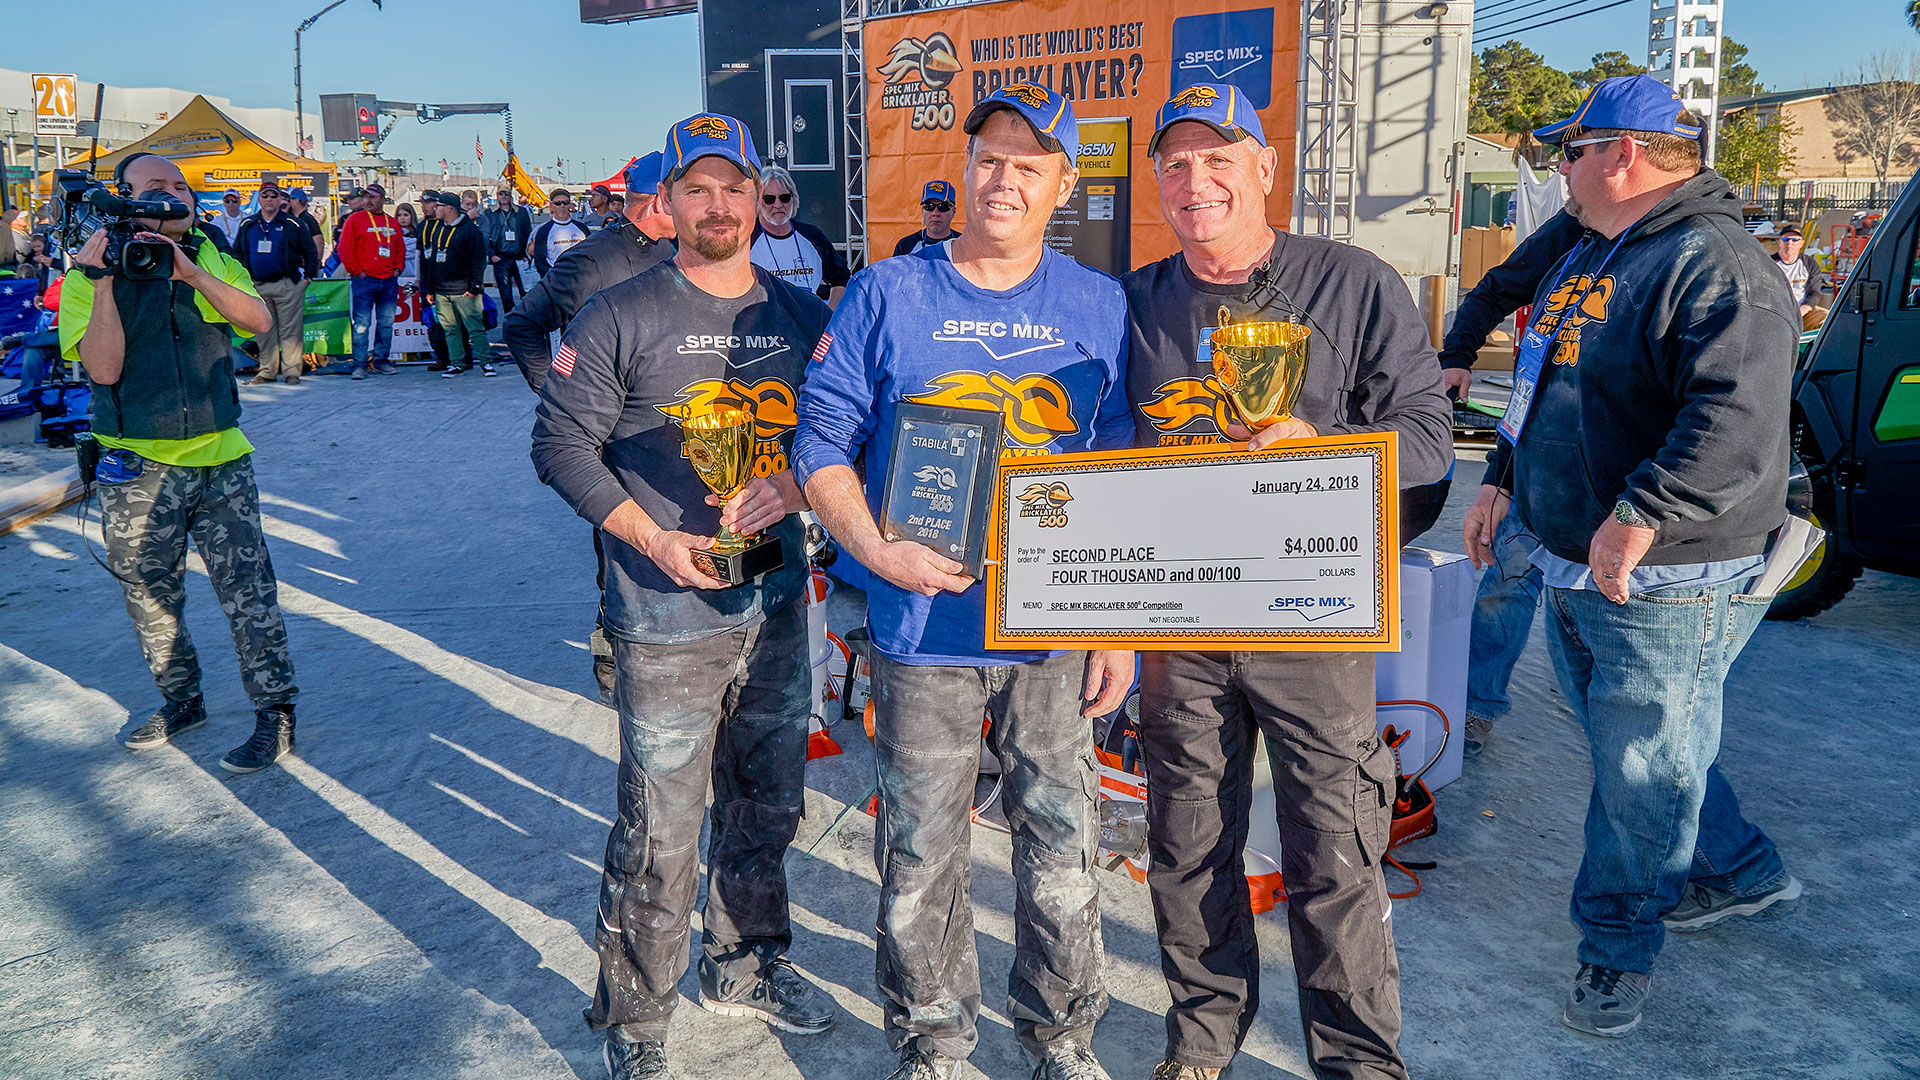 Brian Tuttle (middle) won second place with 689 brick laid. David’s mason tender and brother, Scott Tuttle (left) a former Spec Mix Bricklayer 500® World Champion.